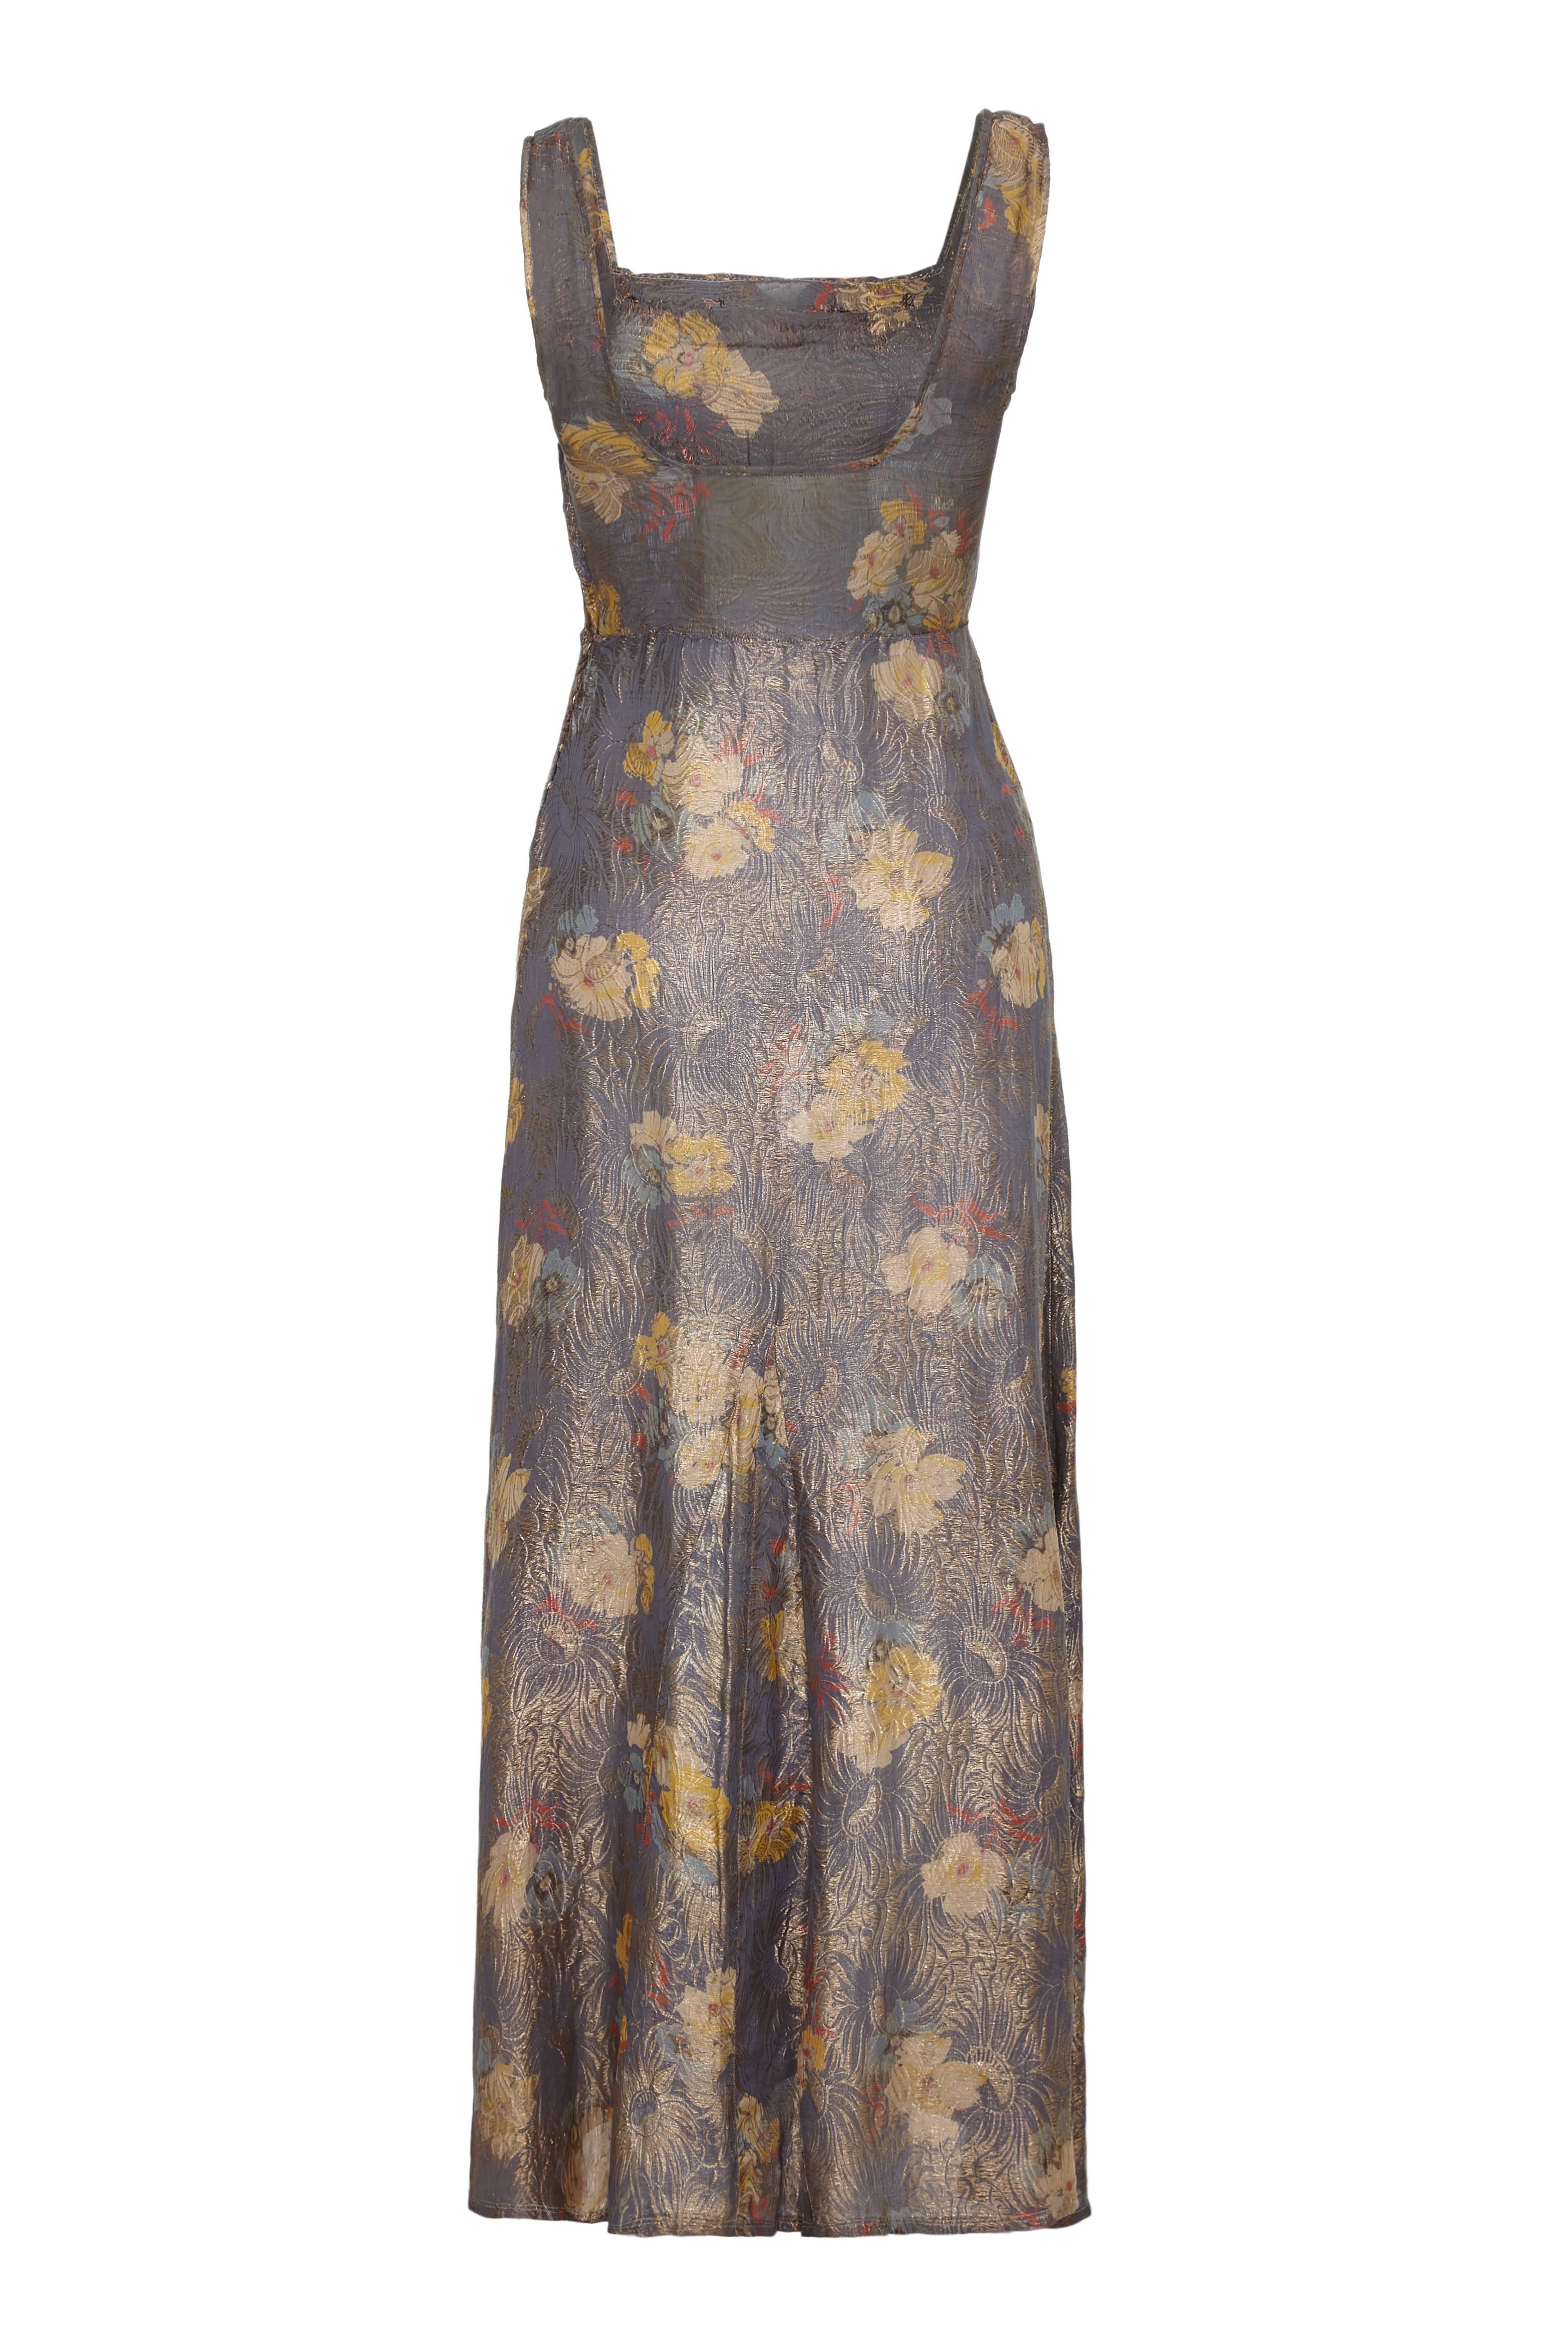 This absolutely enchanting vintage 1930s full length dress in dove grey textured silk with gold lame floral design is in beautiful antique condition. The dress features an empire line bodice and a boat neckline with thick shoulder straps and a